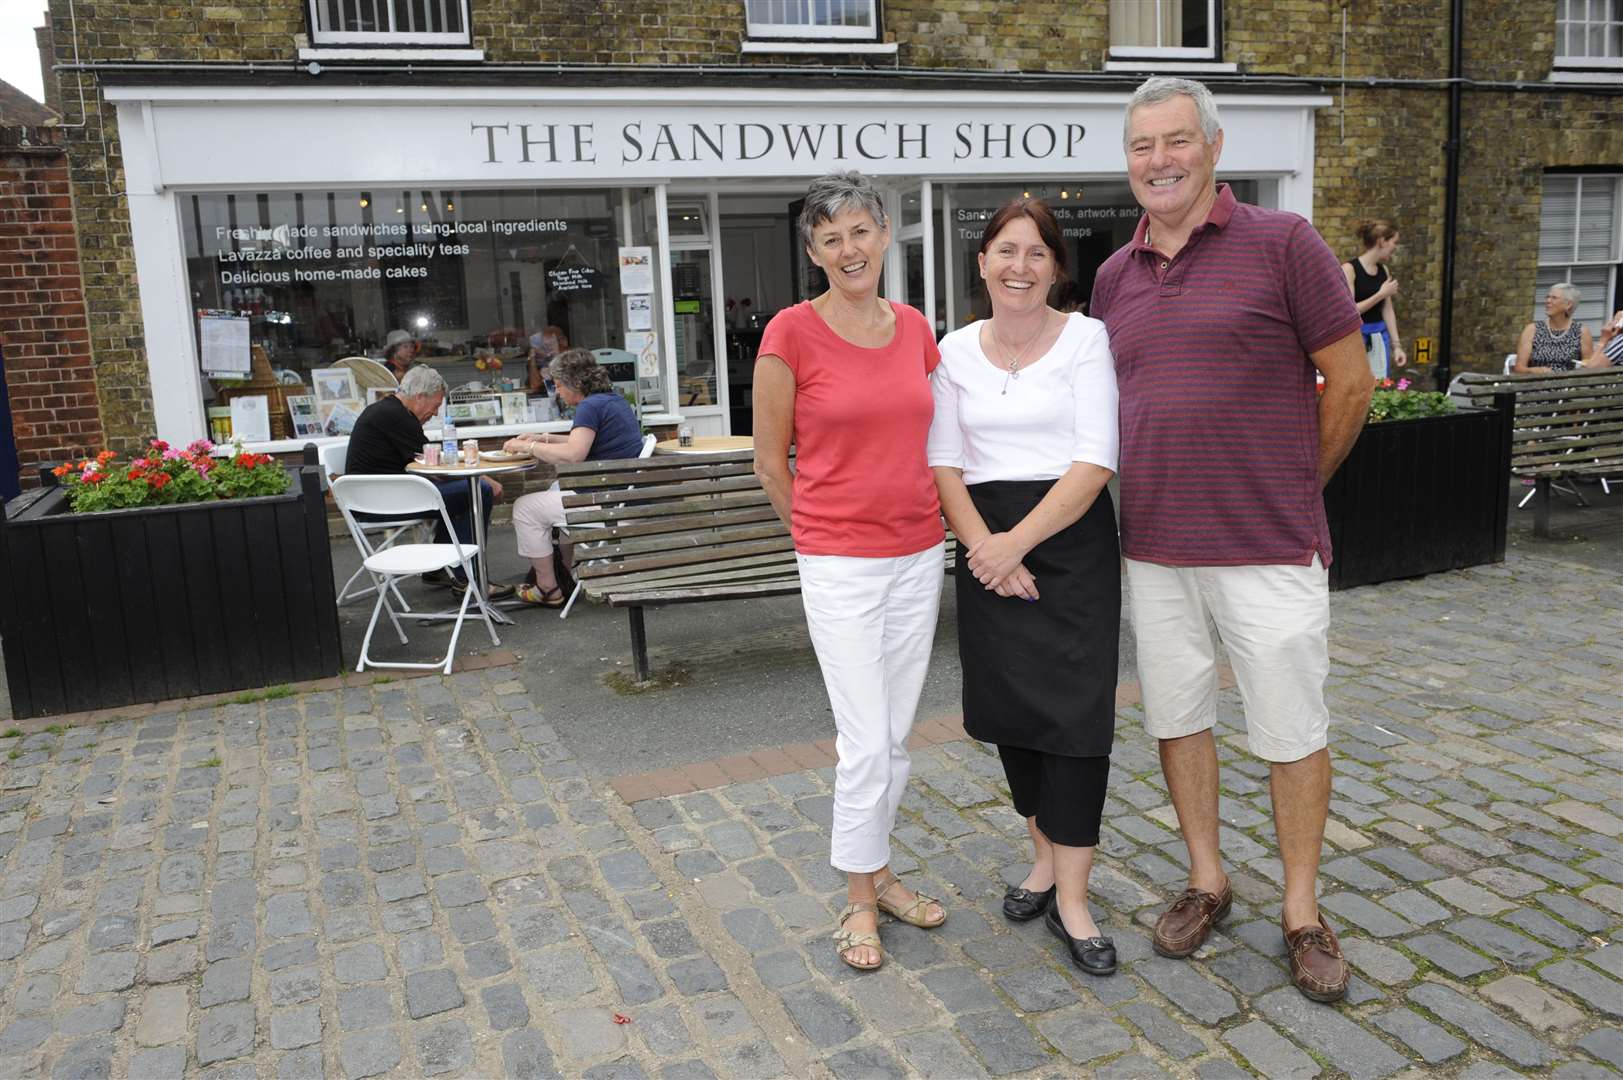 The Sandwich Shop manager Kathy Wilson and pictured with colleagues from the business